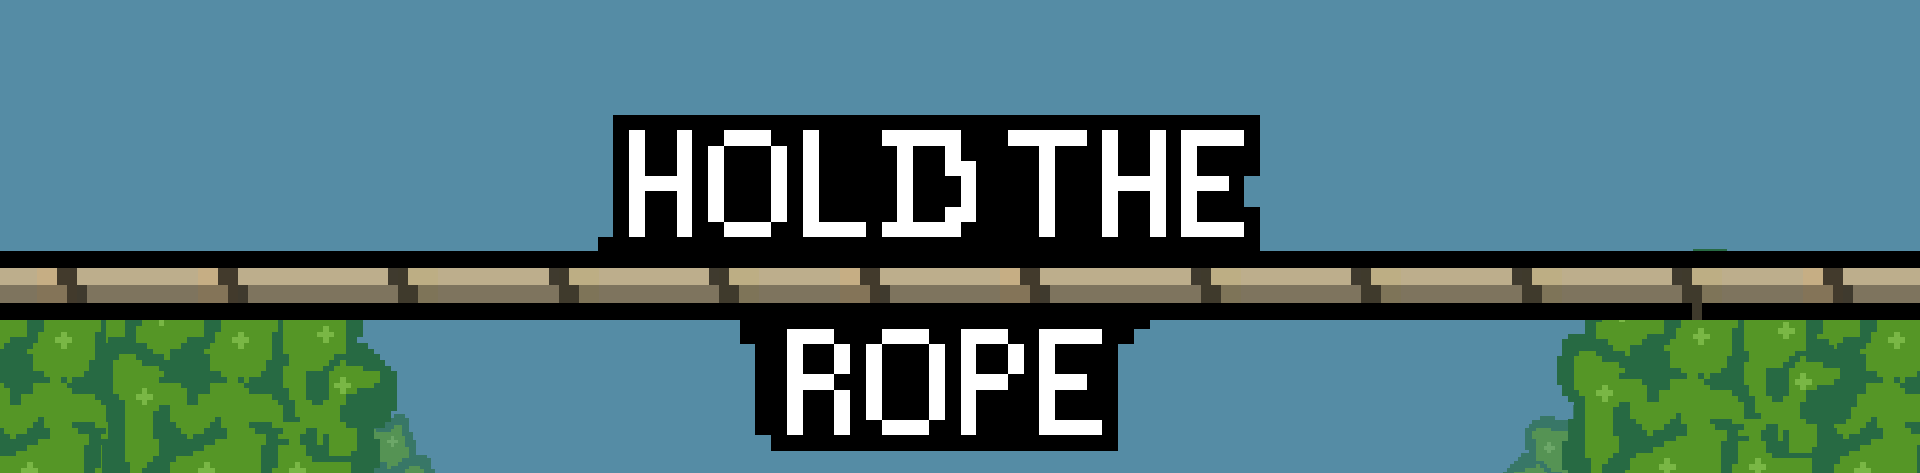 Hold The Rope